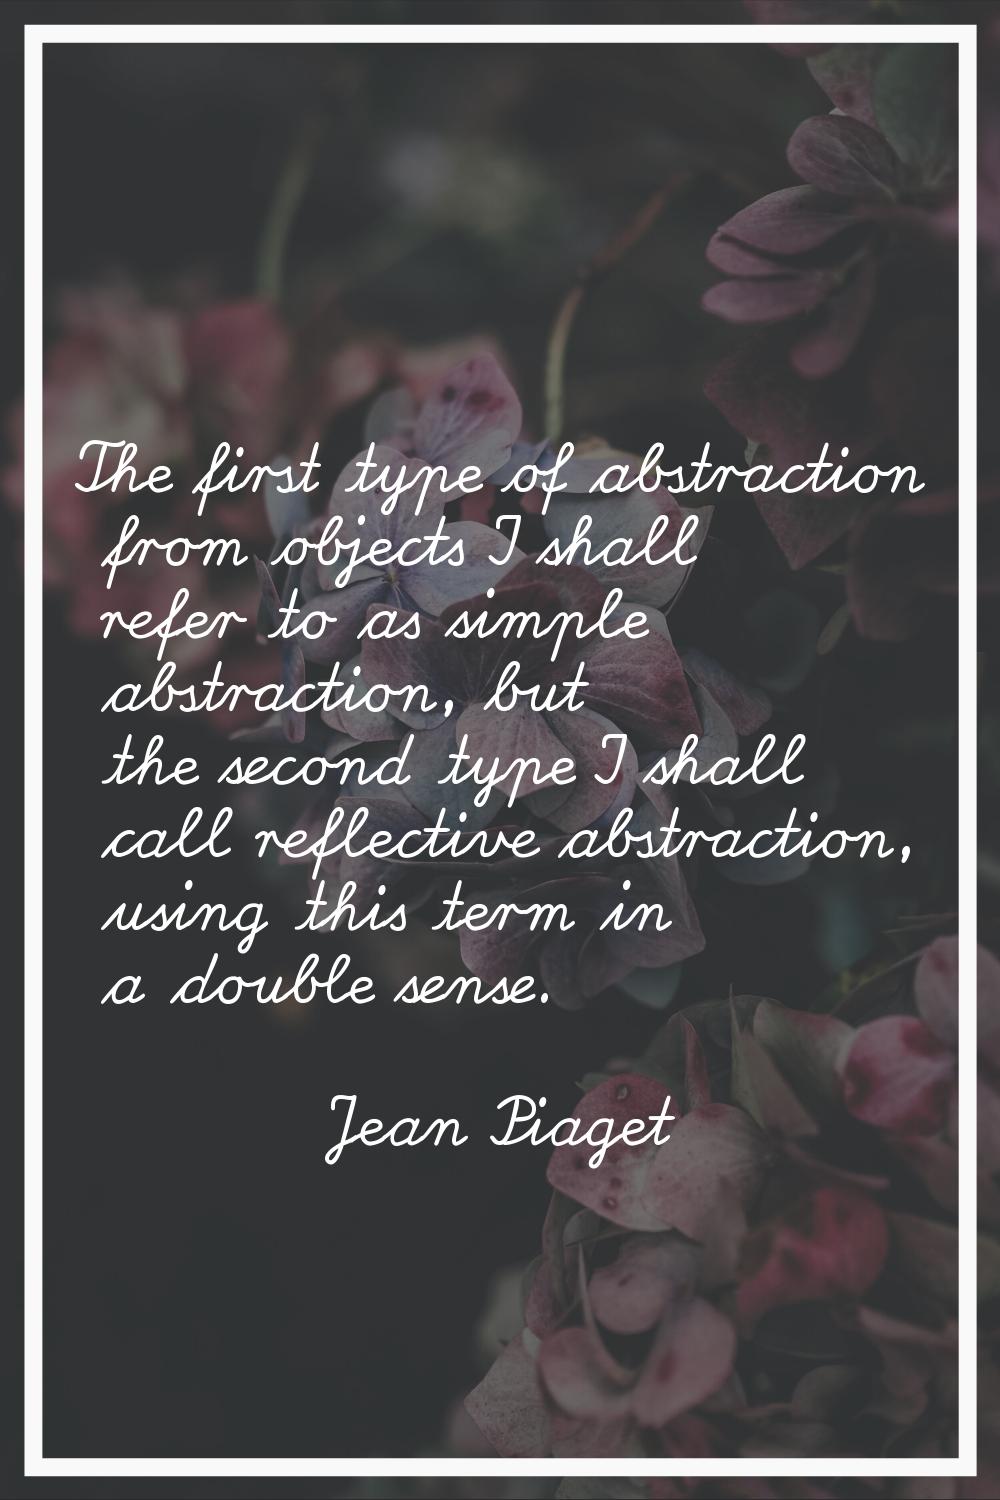 The first type of abstraction from objects I shall refer to as simple abstraction, but the second t